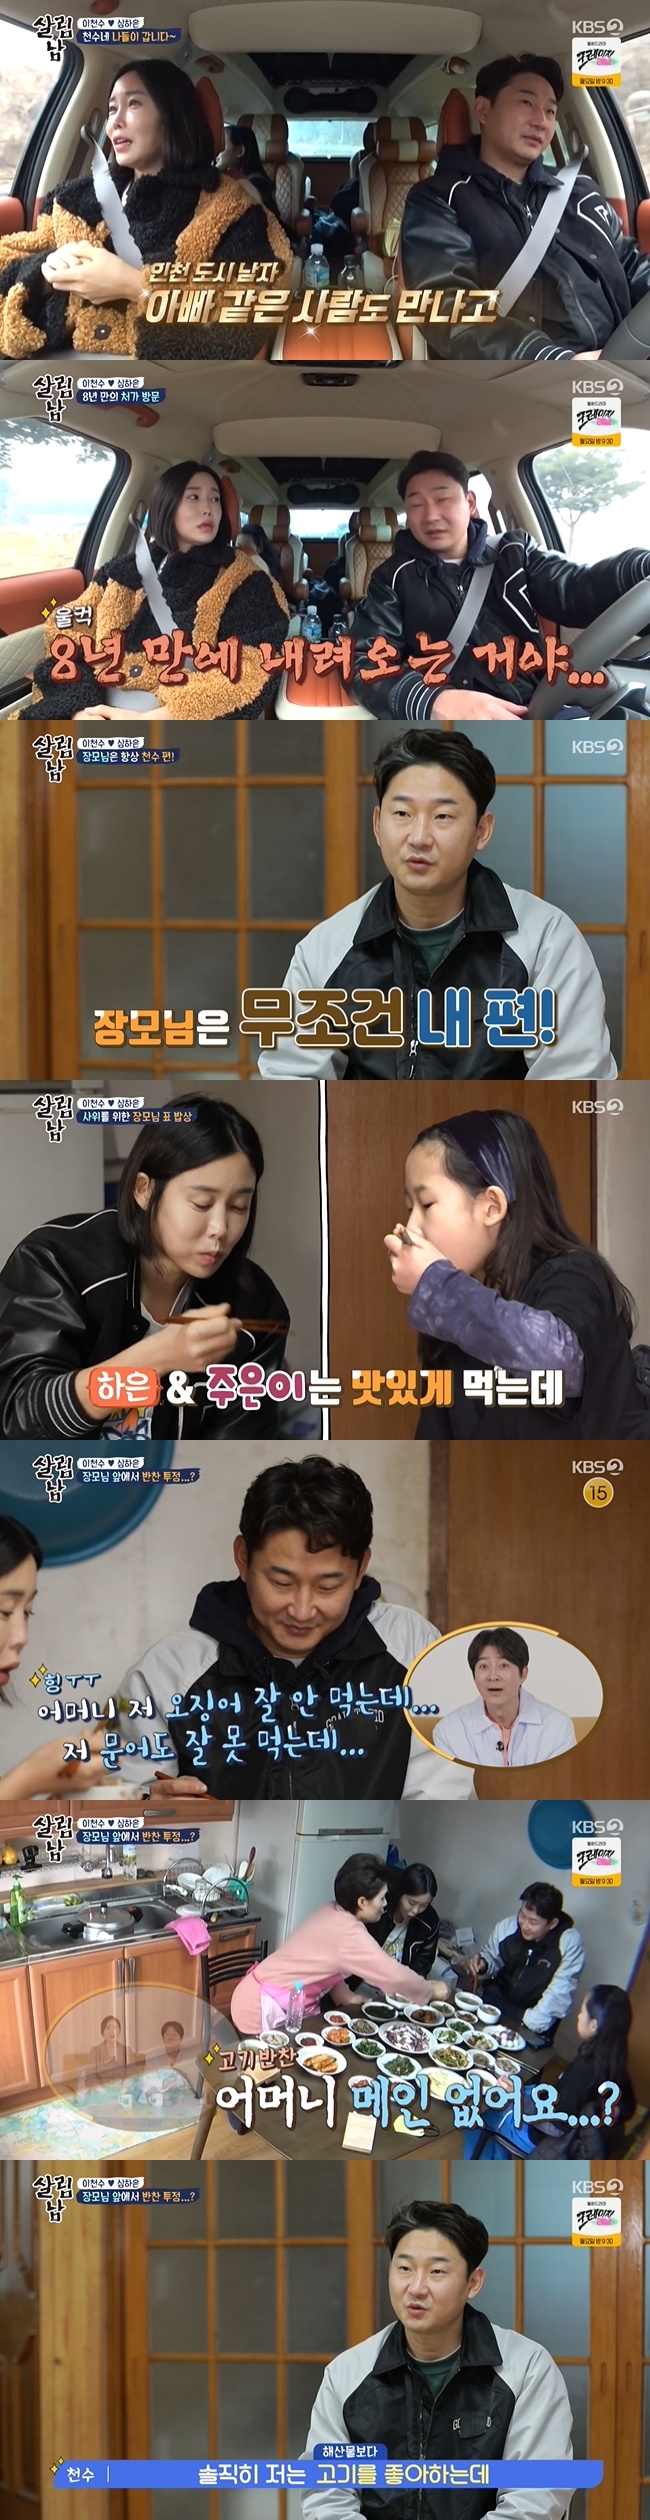 Shim HAEUN has visited her husband Lee Chun-soo and your home home home after eight years together.In KBS 2TVs Saving Men Season 2 broadcast on March 19, Shim HAEUN went to Goheung Your Home in Jeollanam-do.Shim HAEUN was excited about his childhood memories. Lee Chun-soo, who was driving, poured cold water on his horse, saying, You are talking a lot because you come to the city.Lee Chun-soo told her daughter, My mother has developed a lot. I meet Father.There is no one who comes to the countryside like Father, Shim HAEUN said, It is coming down in eight years. Lee Chun-soo has expressed his long drive, saying he should drive together.Lee Chun-soo, who arrived at Shim HAEUNs house in a small town with only 24 households, greeted Zhang Mo with a welcome greeting.Lee Chun-soo said, Zhang Mo is on my side.When I was fighting HAEUN during my love affair, HAEUN called my father and said, Lee Chun-soos not much, I called Zhang Mo and said, HAEUN is not good.He sided with each other. Zhang Mo carefully prepared food such as stone octopus, squid, and herbs for his son-in-law who has been coming for a long time.Lee Chun-soo said, My mother does not eat squid well, but I can not eat octopus well. He said, I smell a lot of mugwort even if I eat soup boiled with mugwort.On the other hand, Shim HAEUN and daughter Lee Ju-eun were blessed without side dishes.Lee Chun-soo continued to say, It is delicious but smells strong. Is your mother not in the main?Lee Chun-soo explained to the production team, I honestly like meat, but there was no meat, there was fish and herbs.When Zhang Mo prepared Baek Sook, Lee Chun-soo shook his head, saying, I am only Zhang Mo after his expression changed like a child.